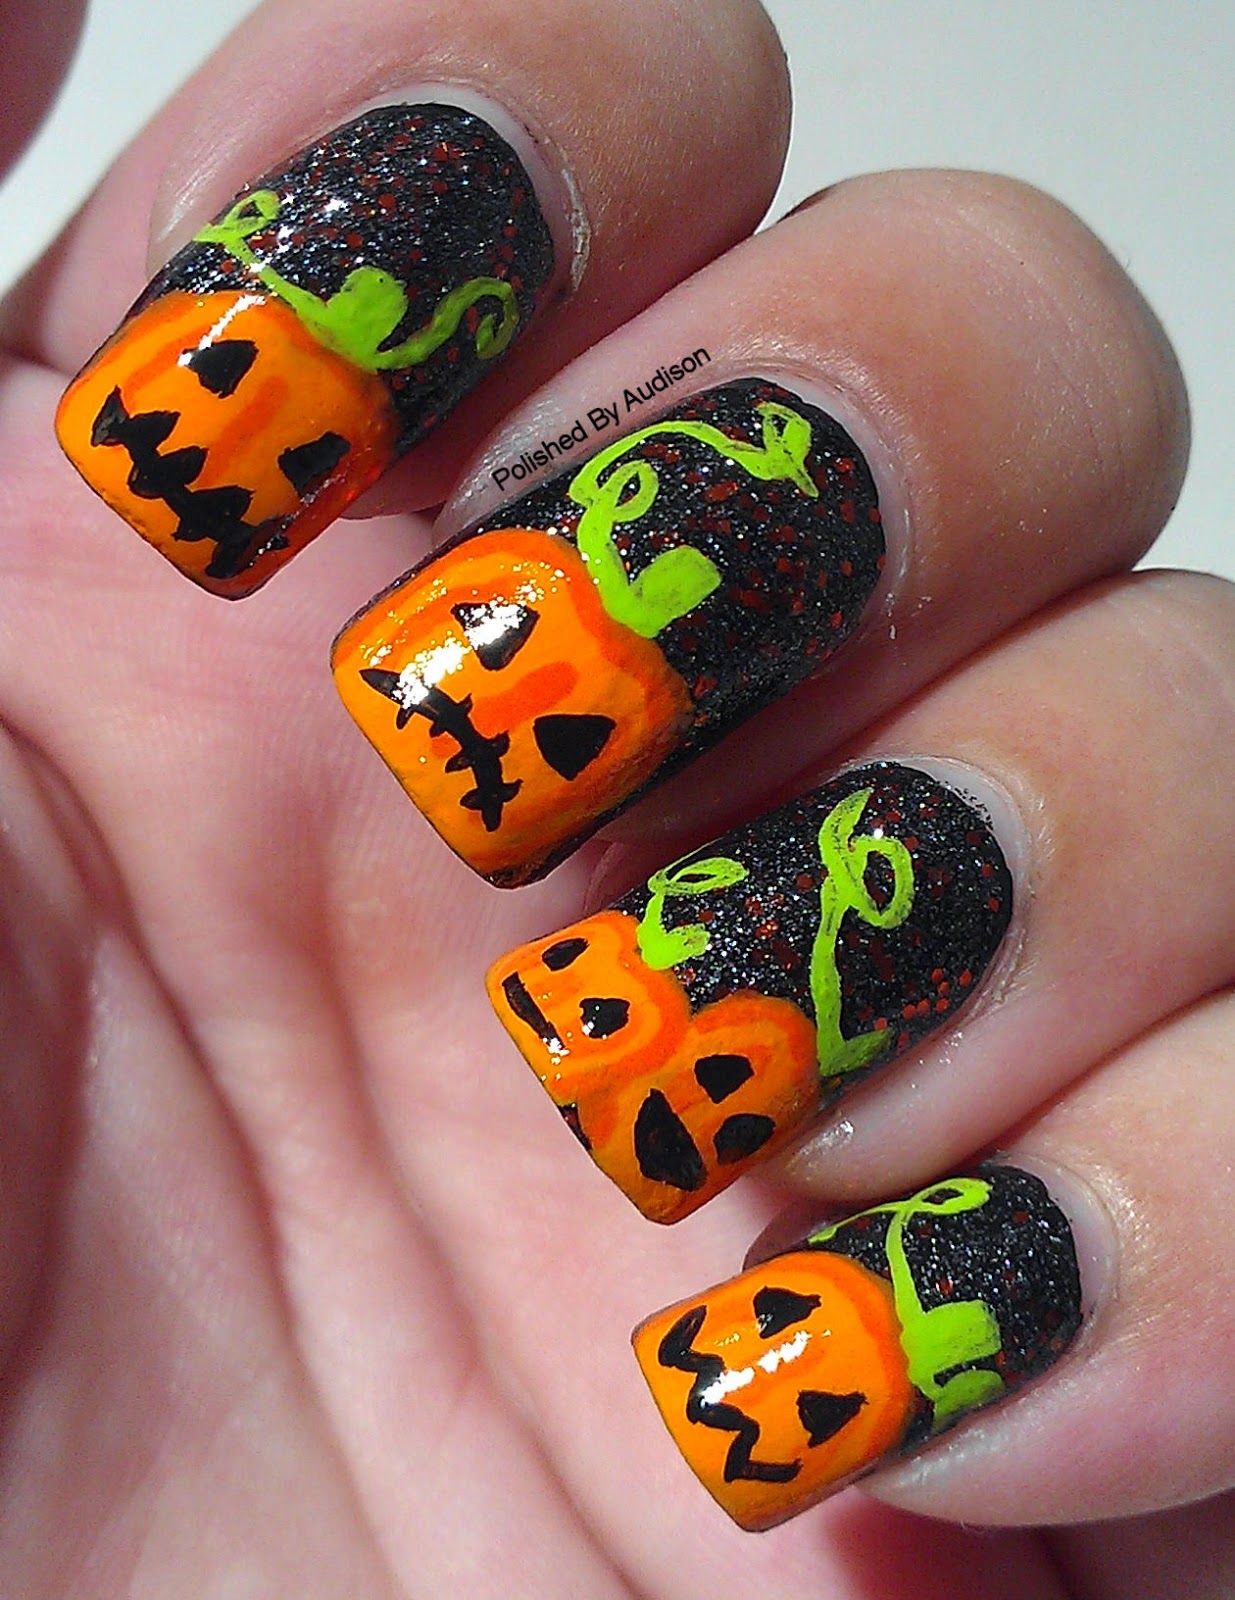 Polished By Audison: 13 days of Halloween | Pumpkin Nail Art